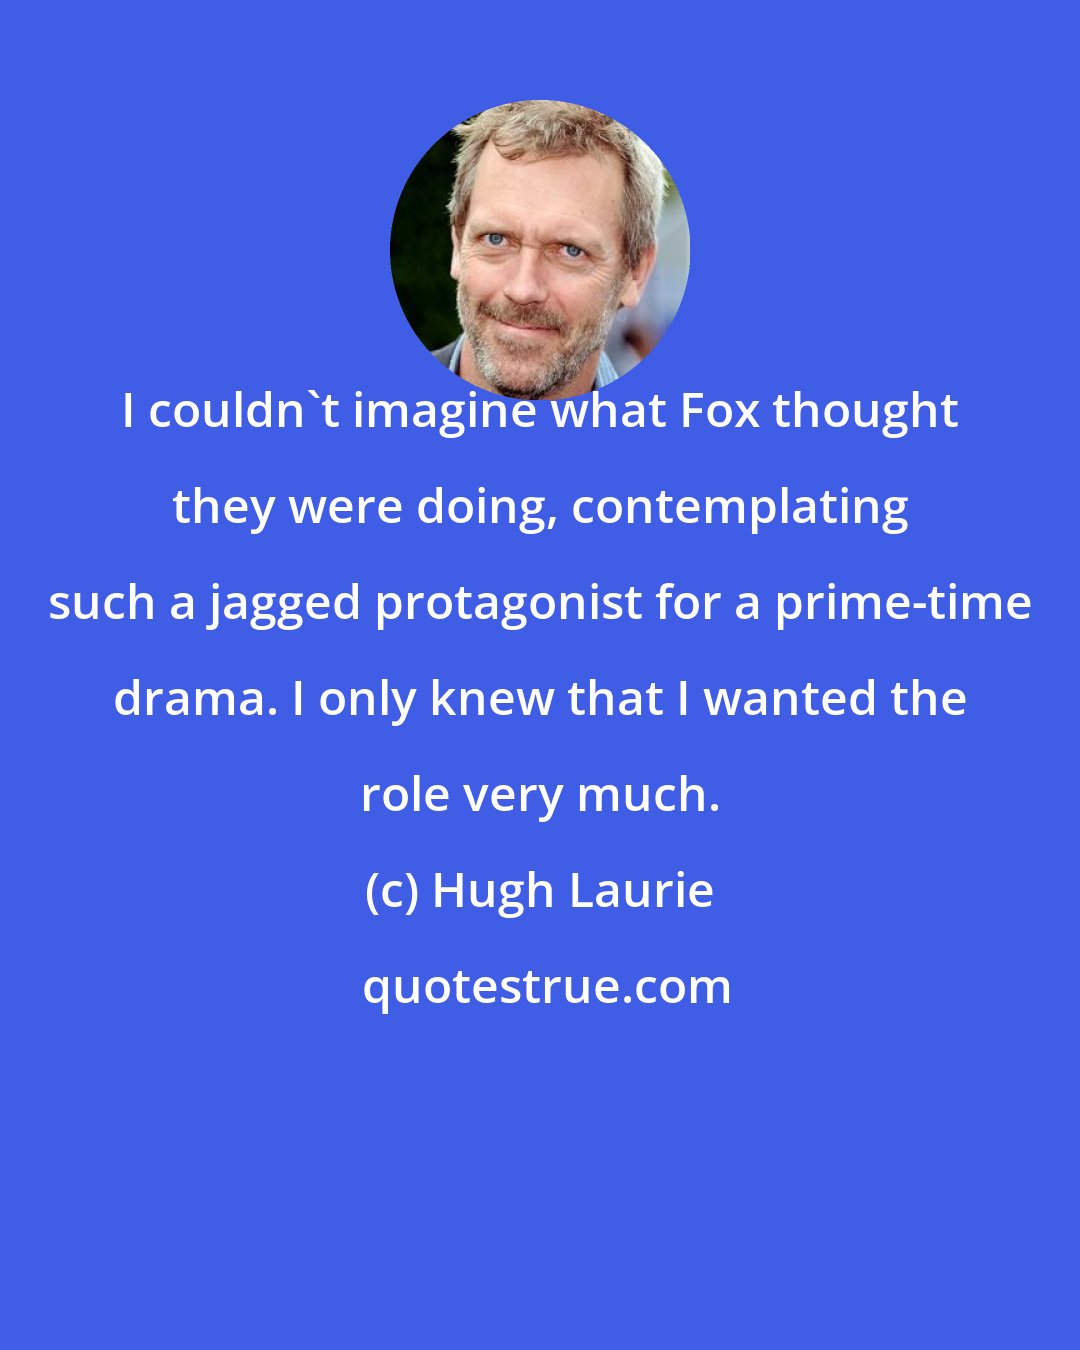 Hugh Laurie: I couldn't imagine what Fox thought they were doing, contemplating such a jagged protagonist for a prime-time drama. I only knew that I wanted the role very much.